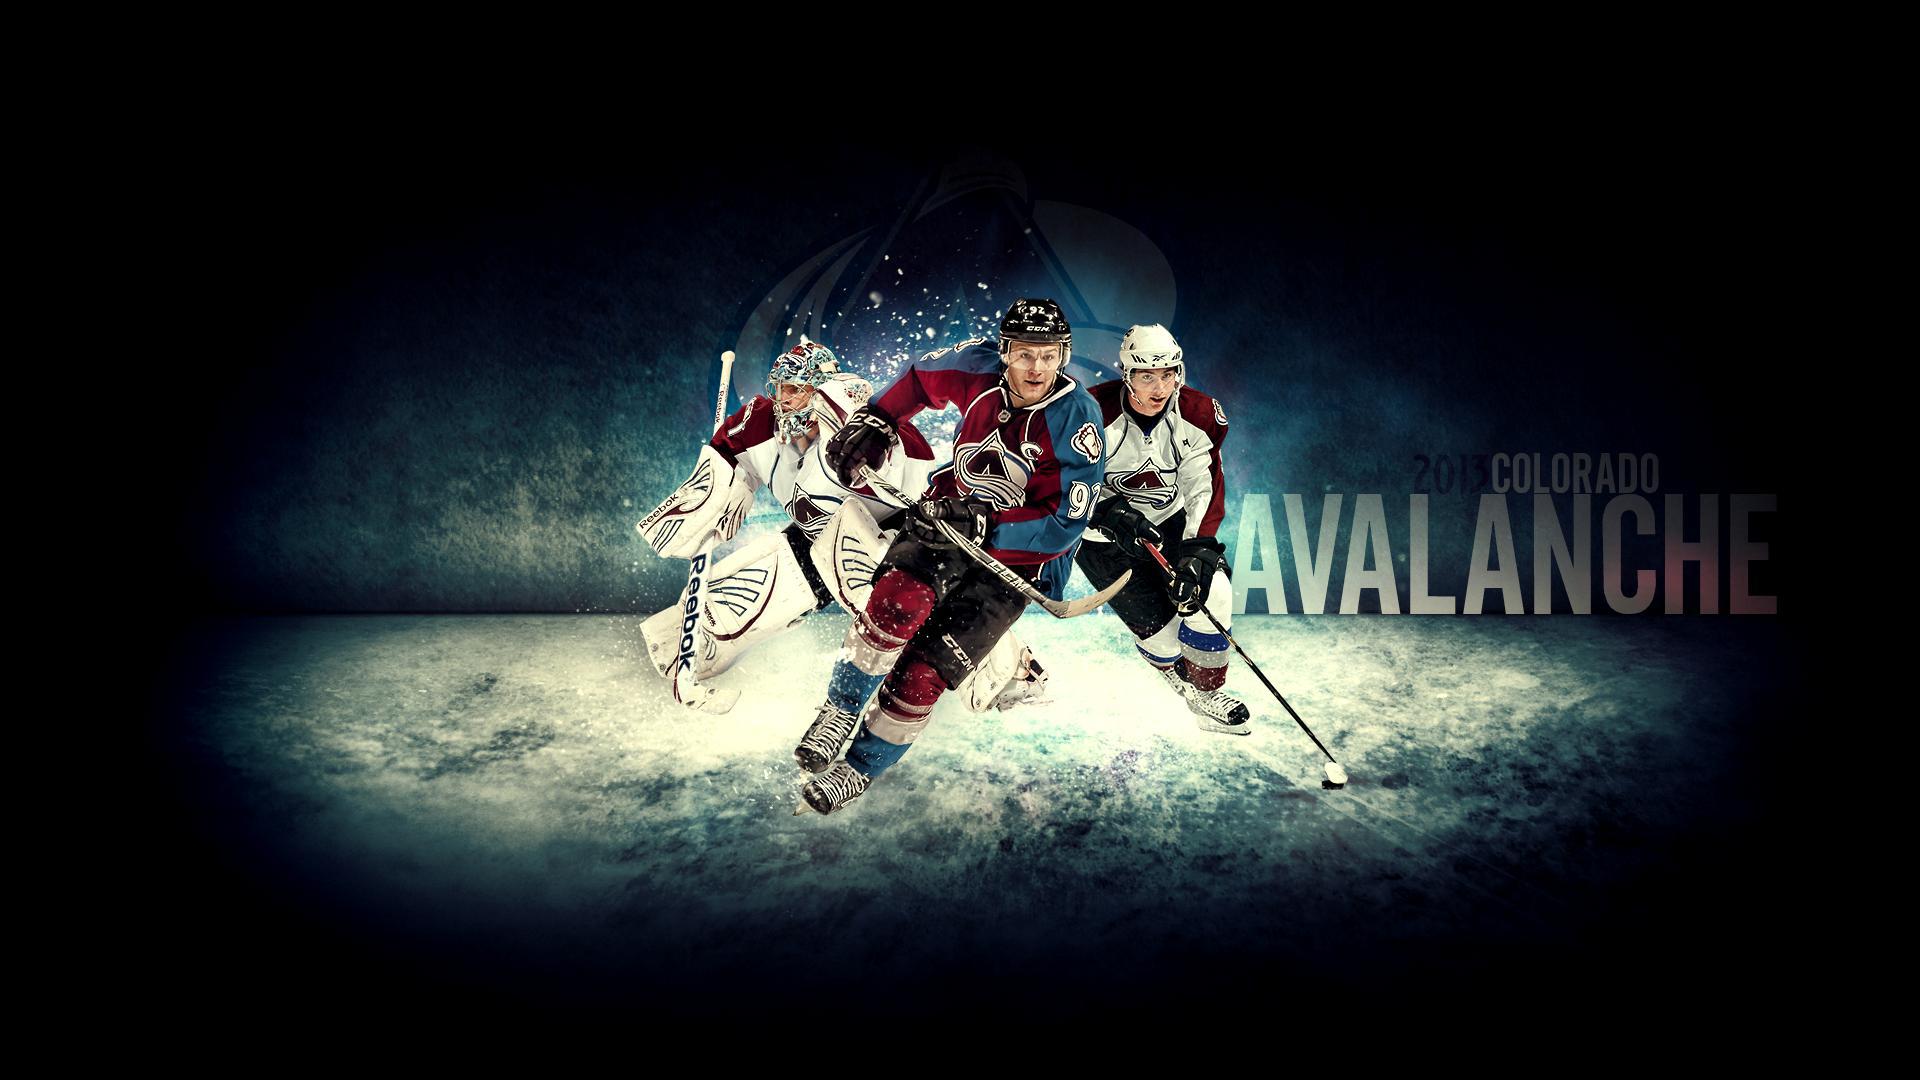 NHL player Gabriel Landeskog wallpapers and images - wallpapers